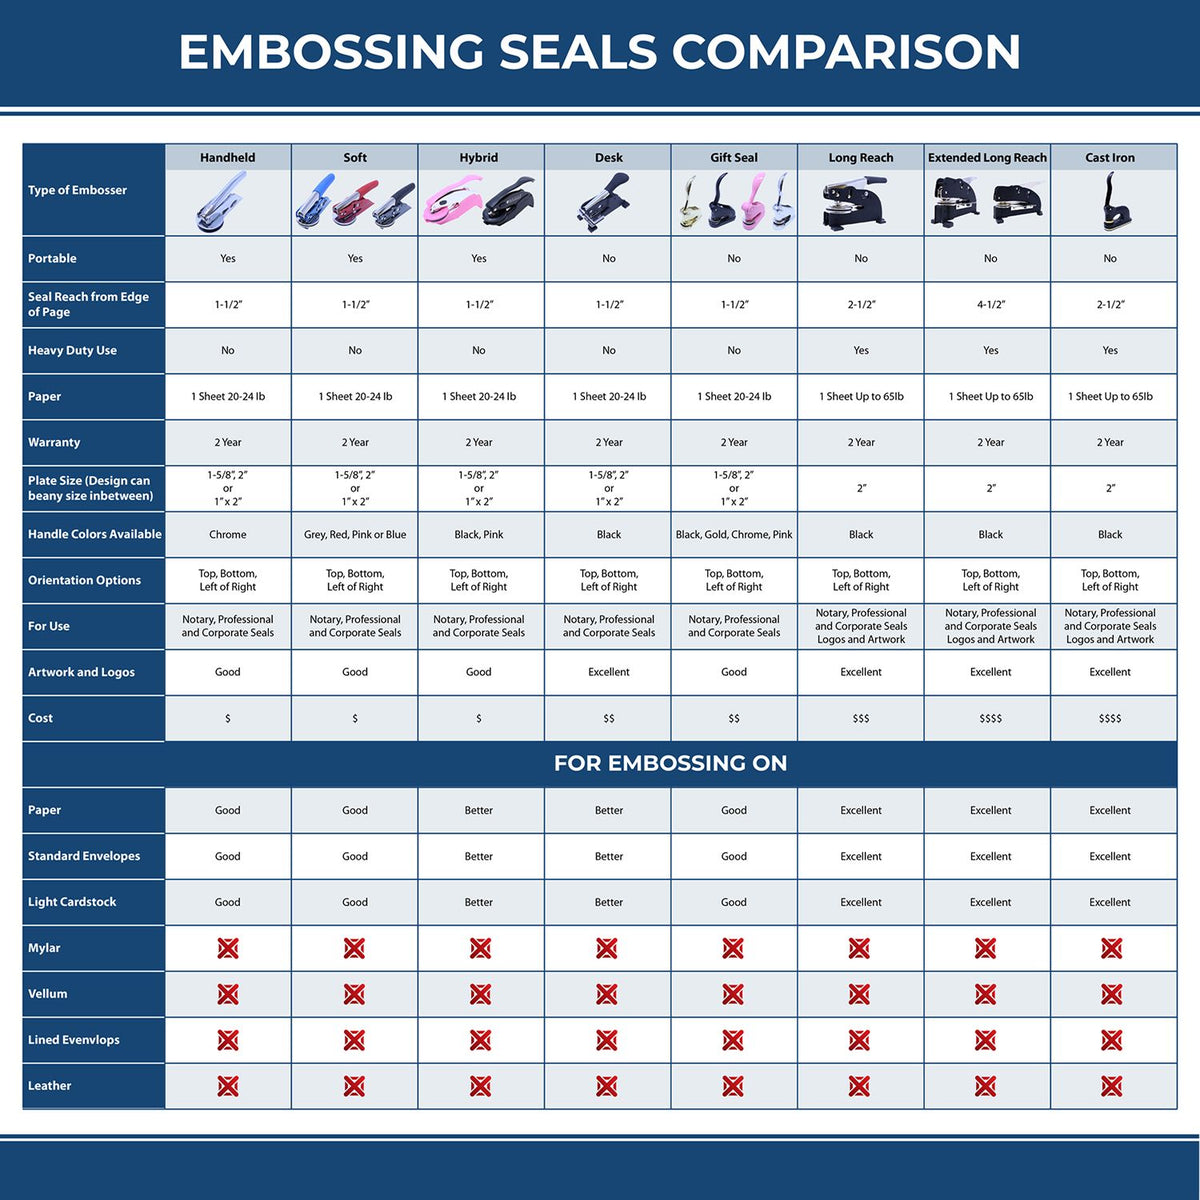 A comparison chart for the different types of mount models available for the Soft Nevada Professional Engineer Seal.